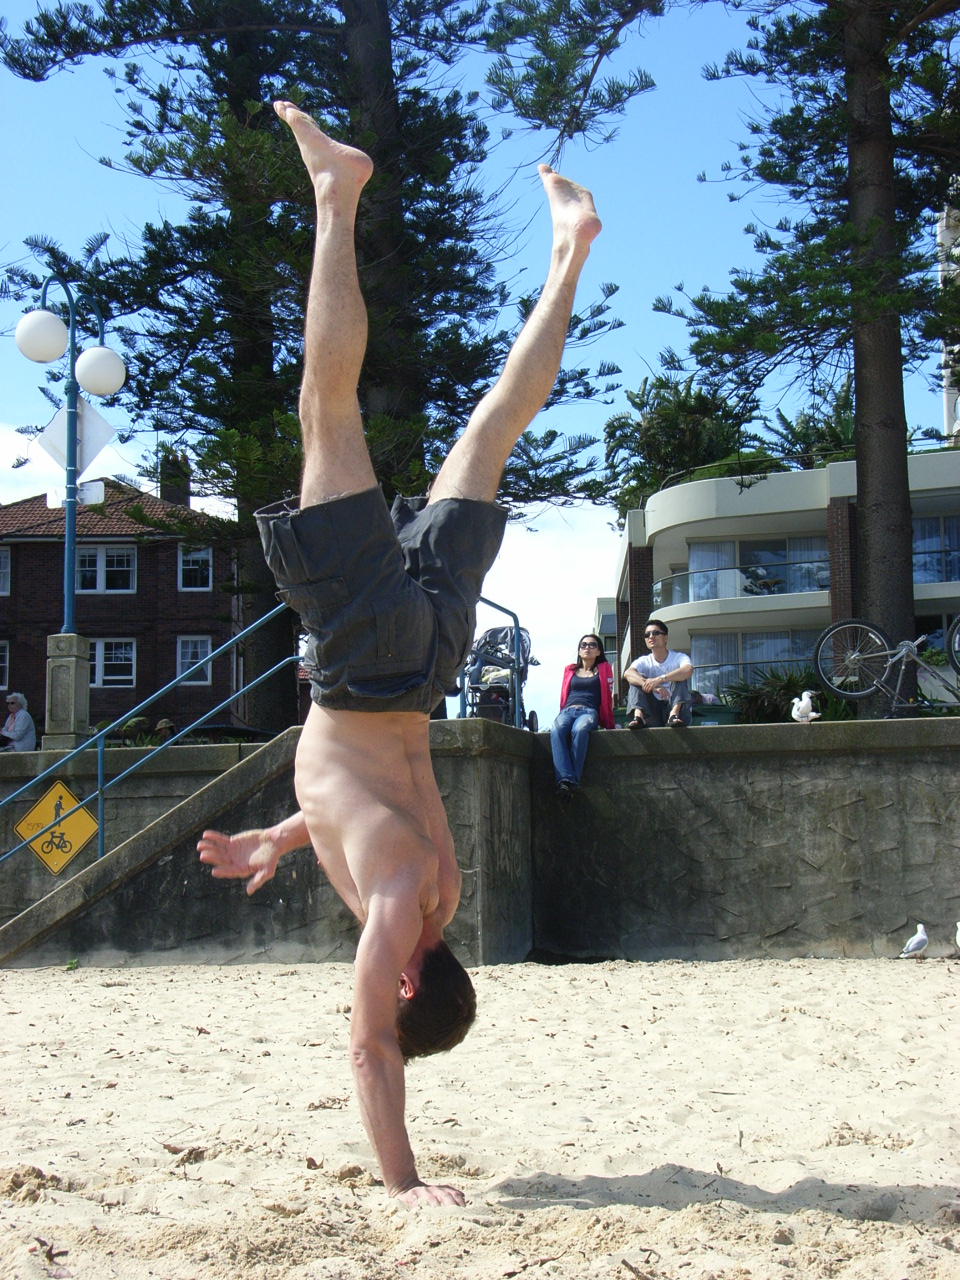 One handed handstand!